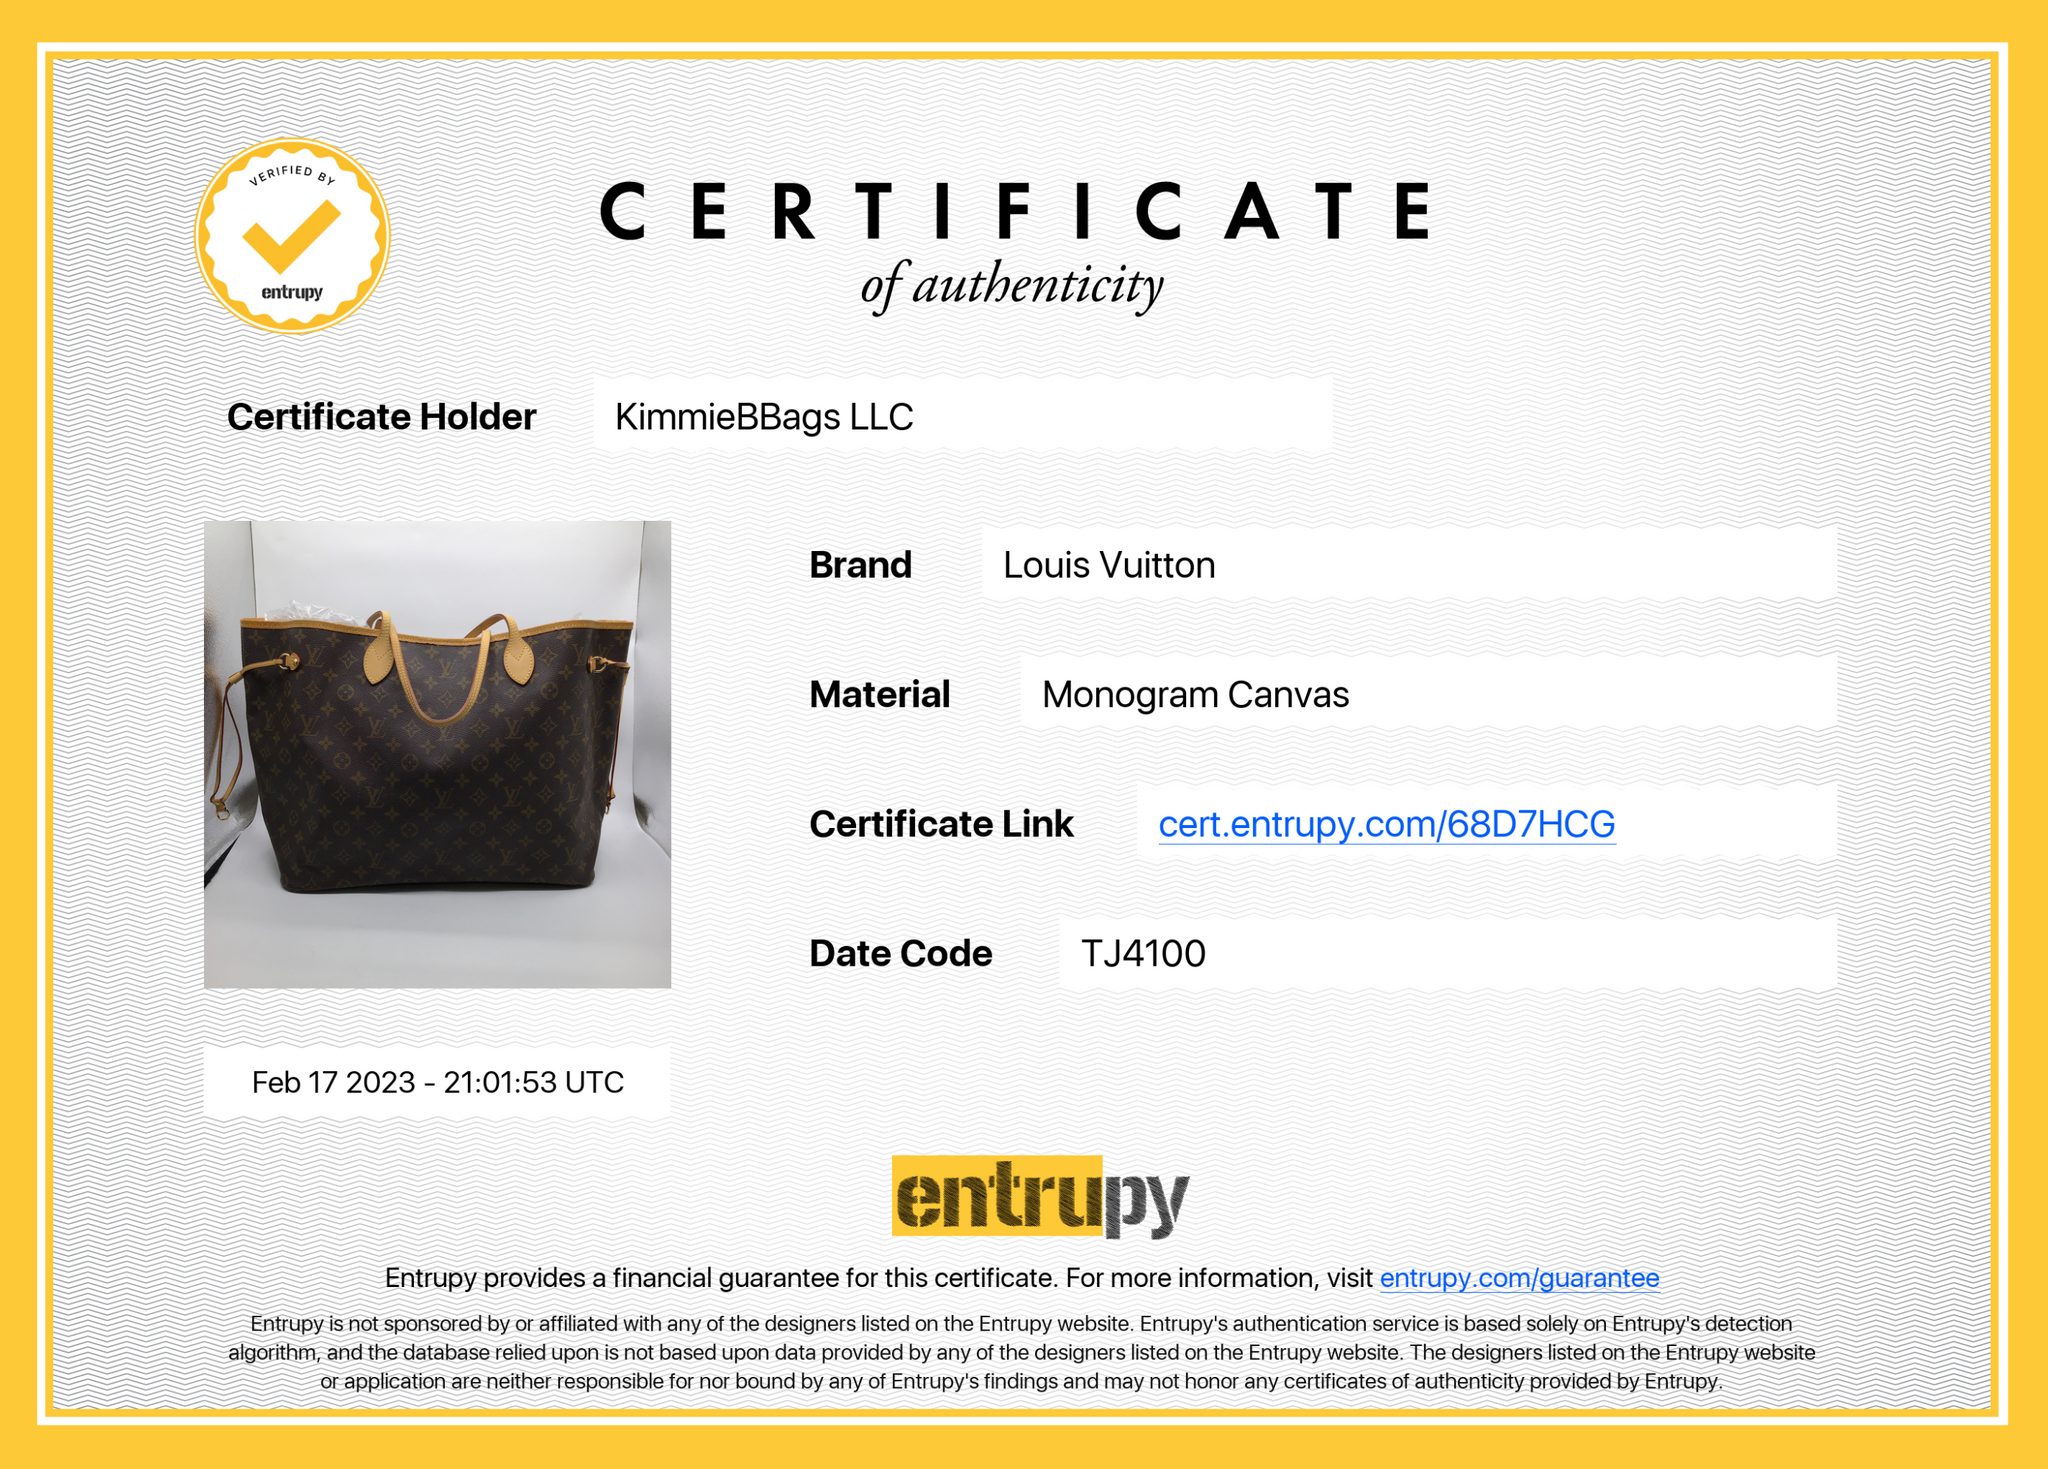 Buy Free Shipping [Used] LOUIS VUITTON Neverfull GM Tote Bag